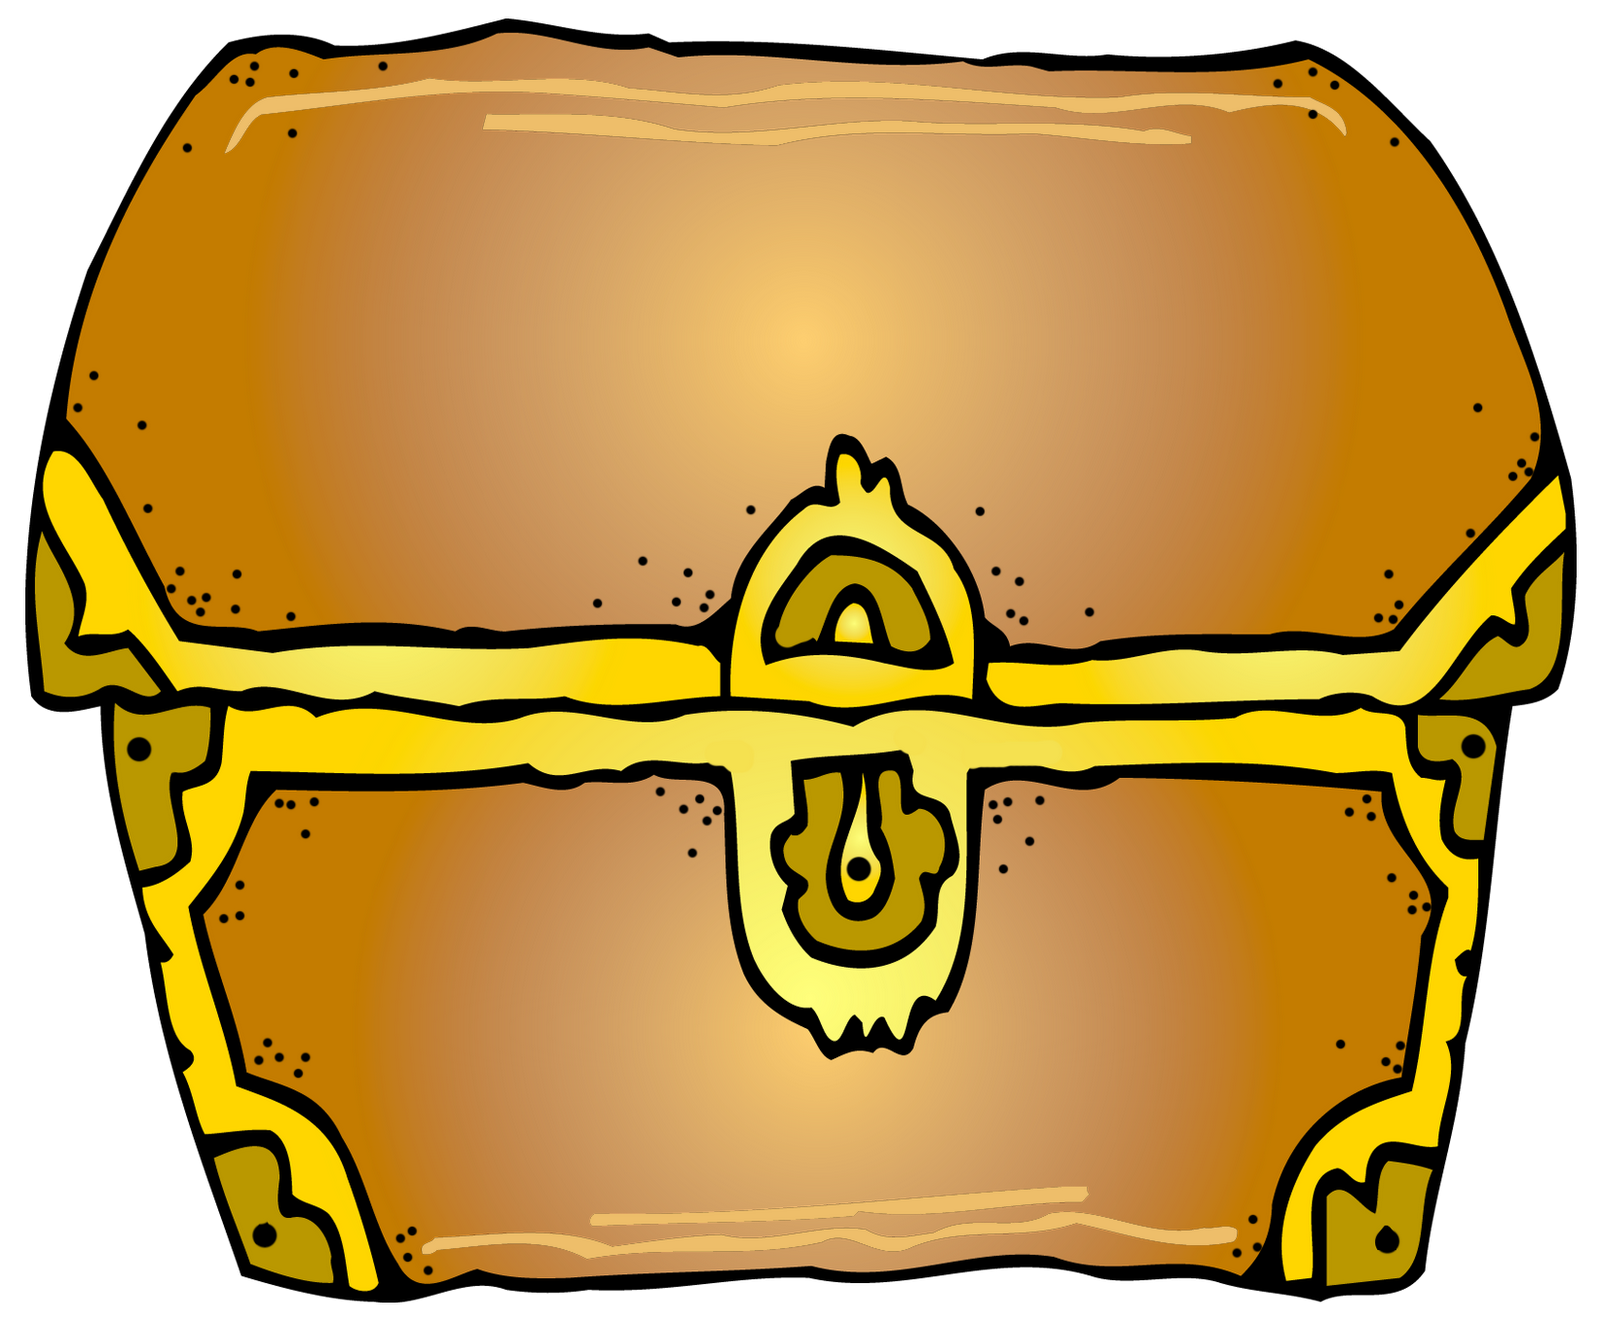 free clipart images treasure chest - photo #23